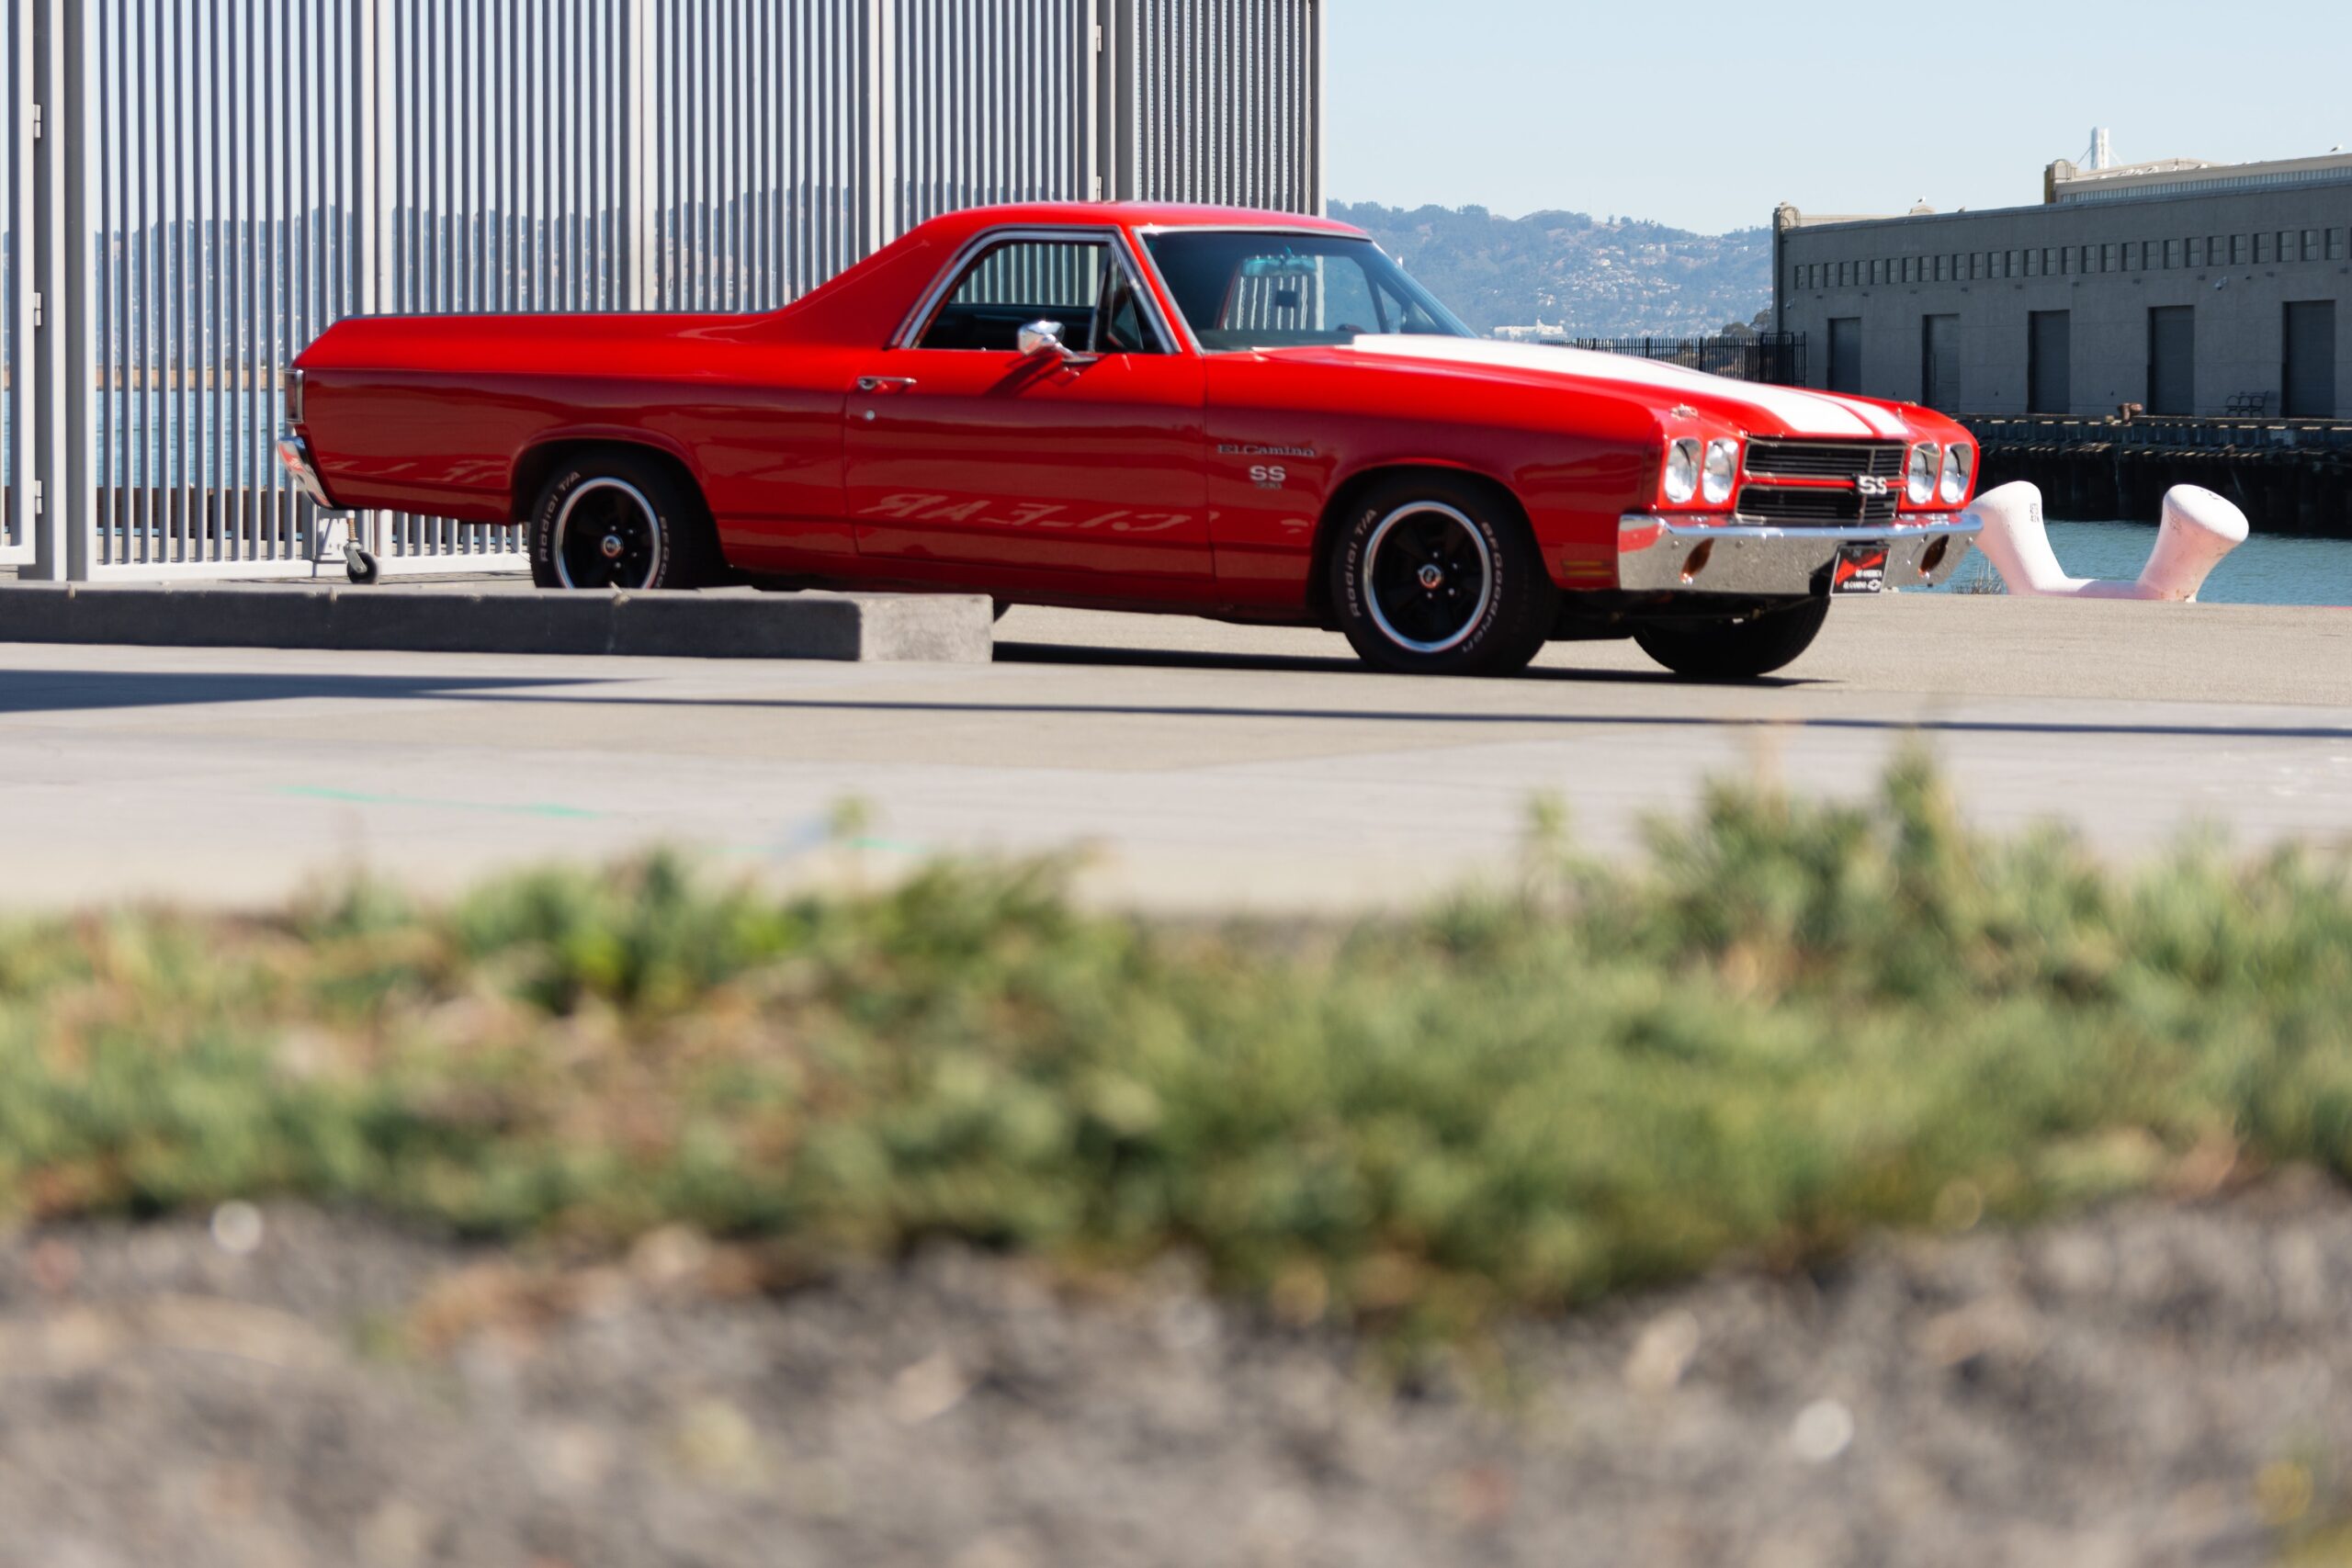 The El Camino has plenty of power, you just have to know it's off-road limits.